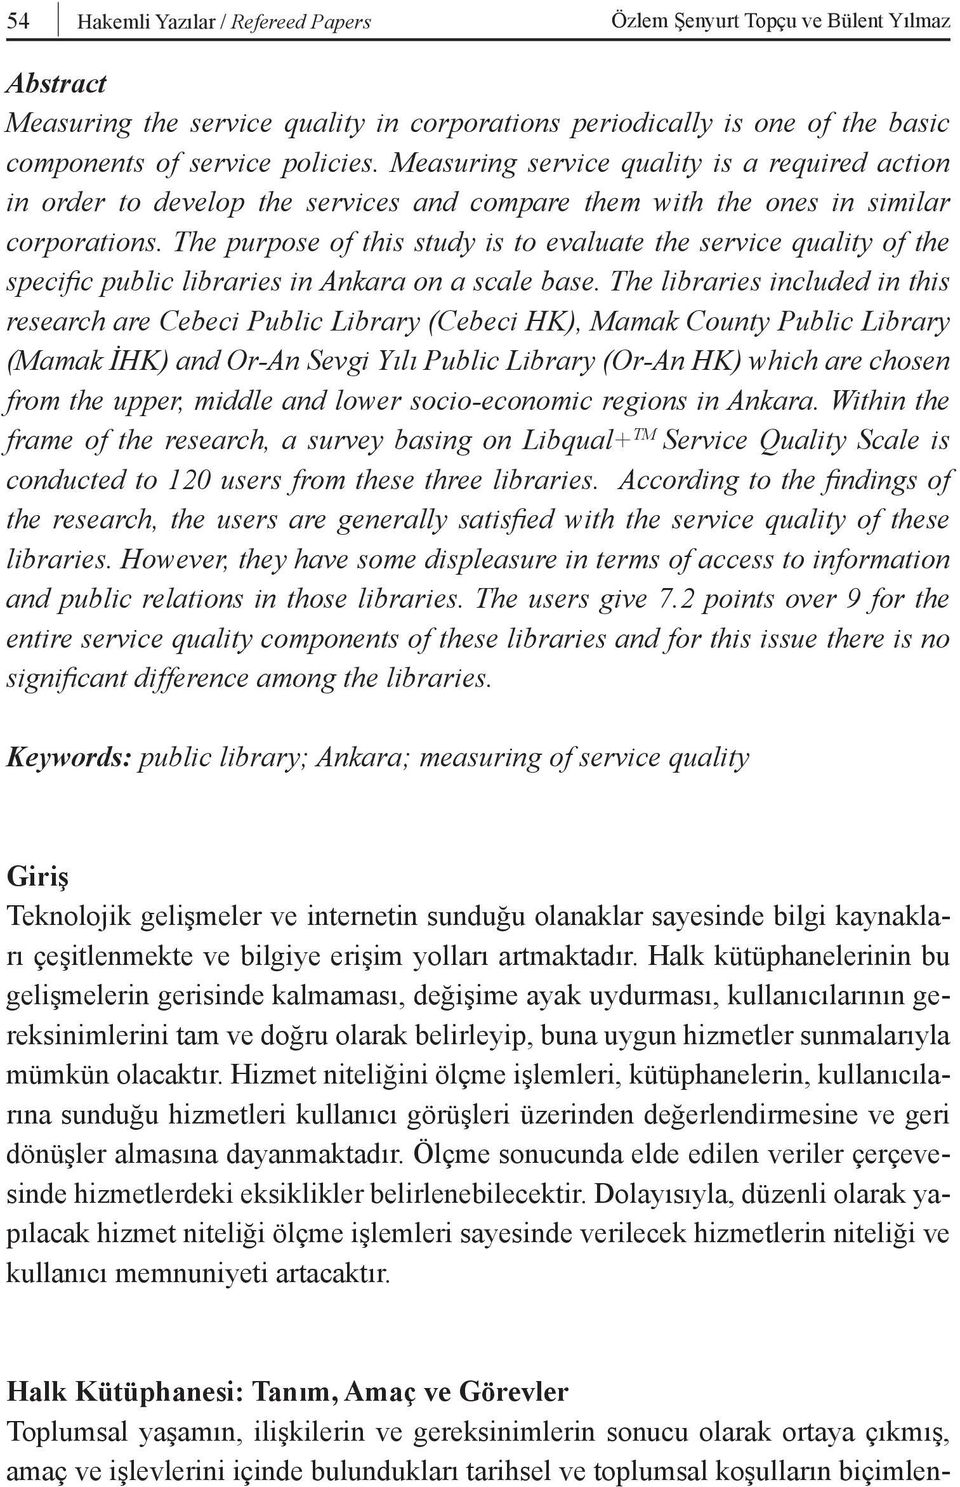 The purpose of this study is to evaluate the service quality of the specific public libraries in Ankara on a scale base.